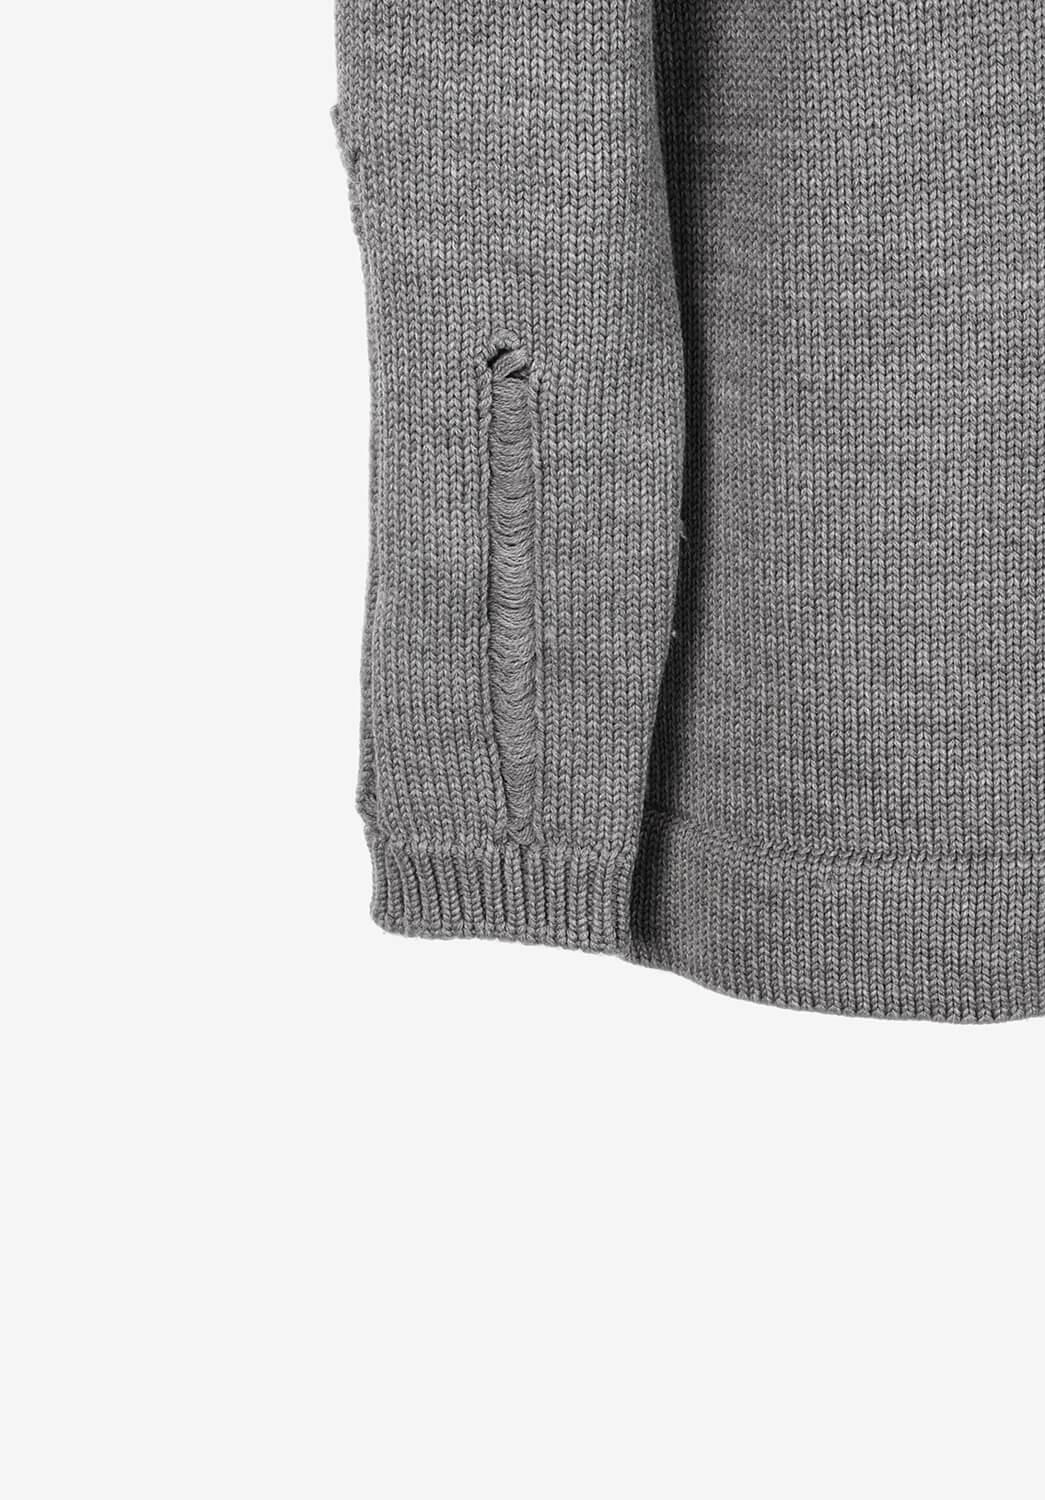 Gray Dior Homme Merino Wool AW02 Turtle Neck Knitted Distressed Men Sweater Size M